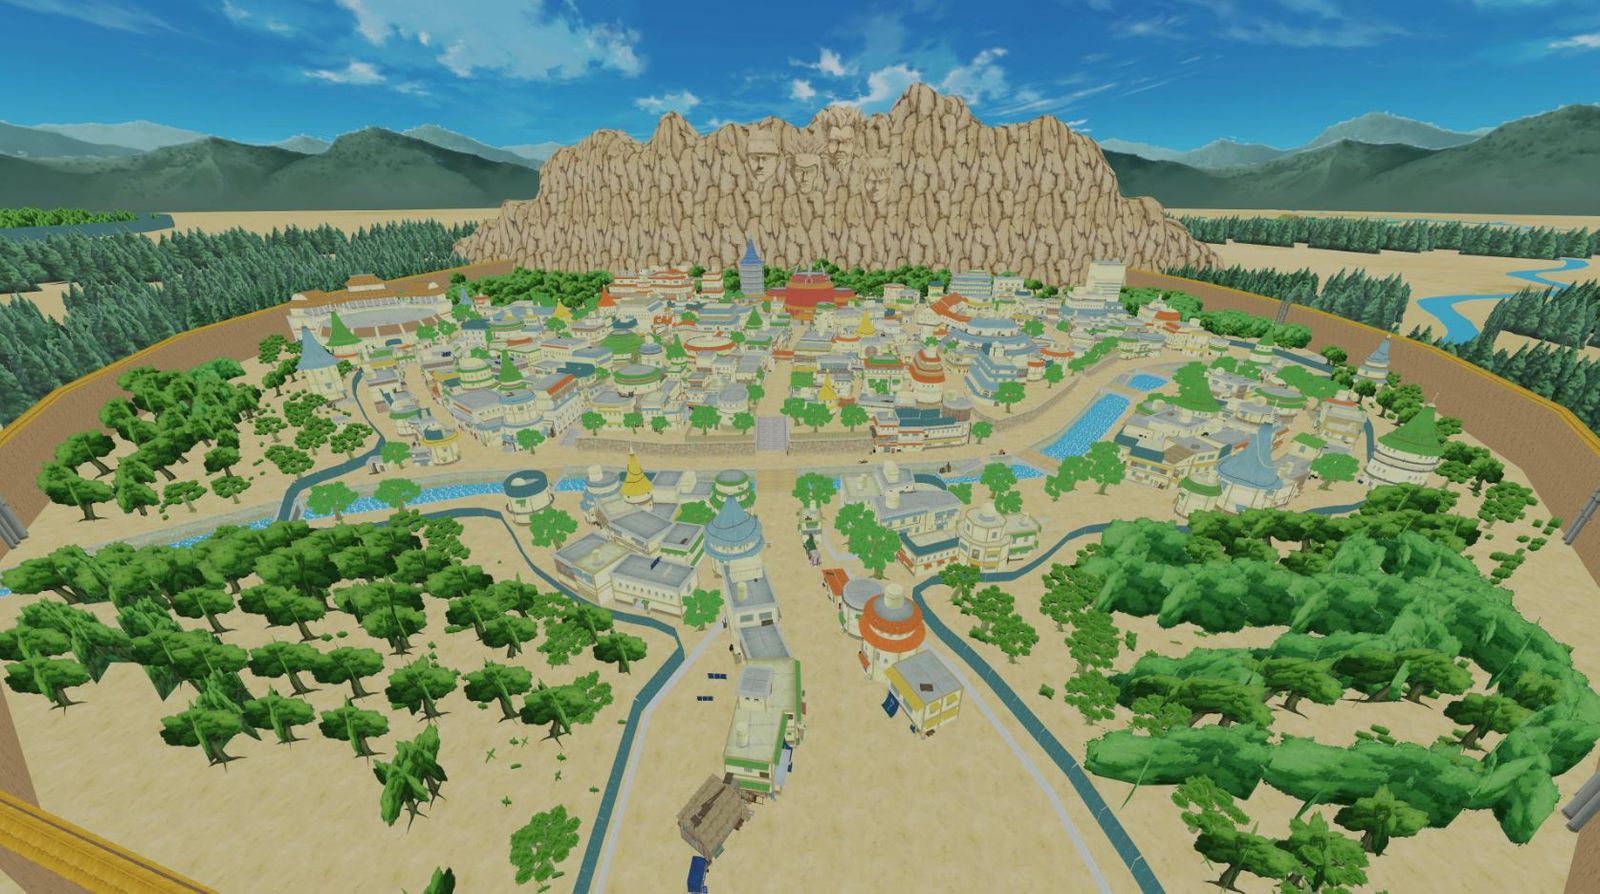 A wide view of a ninja village